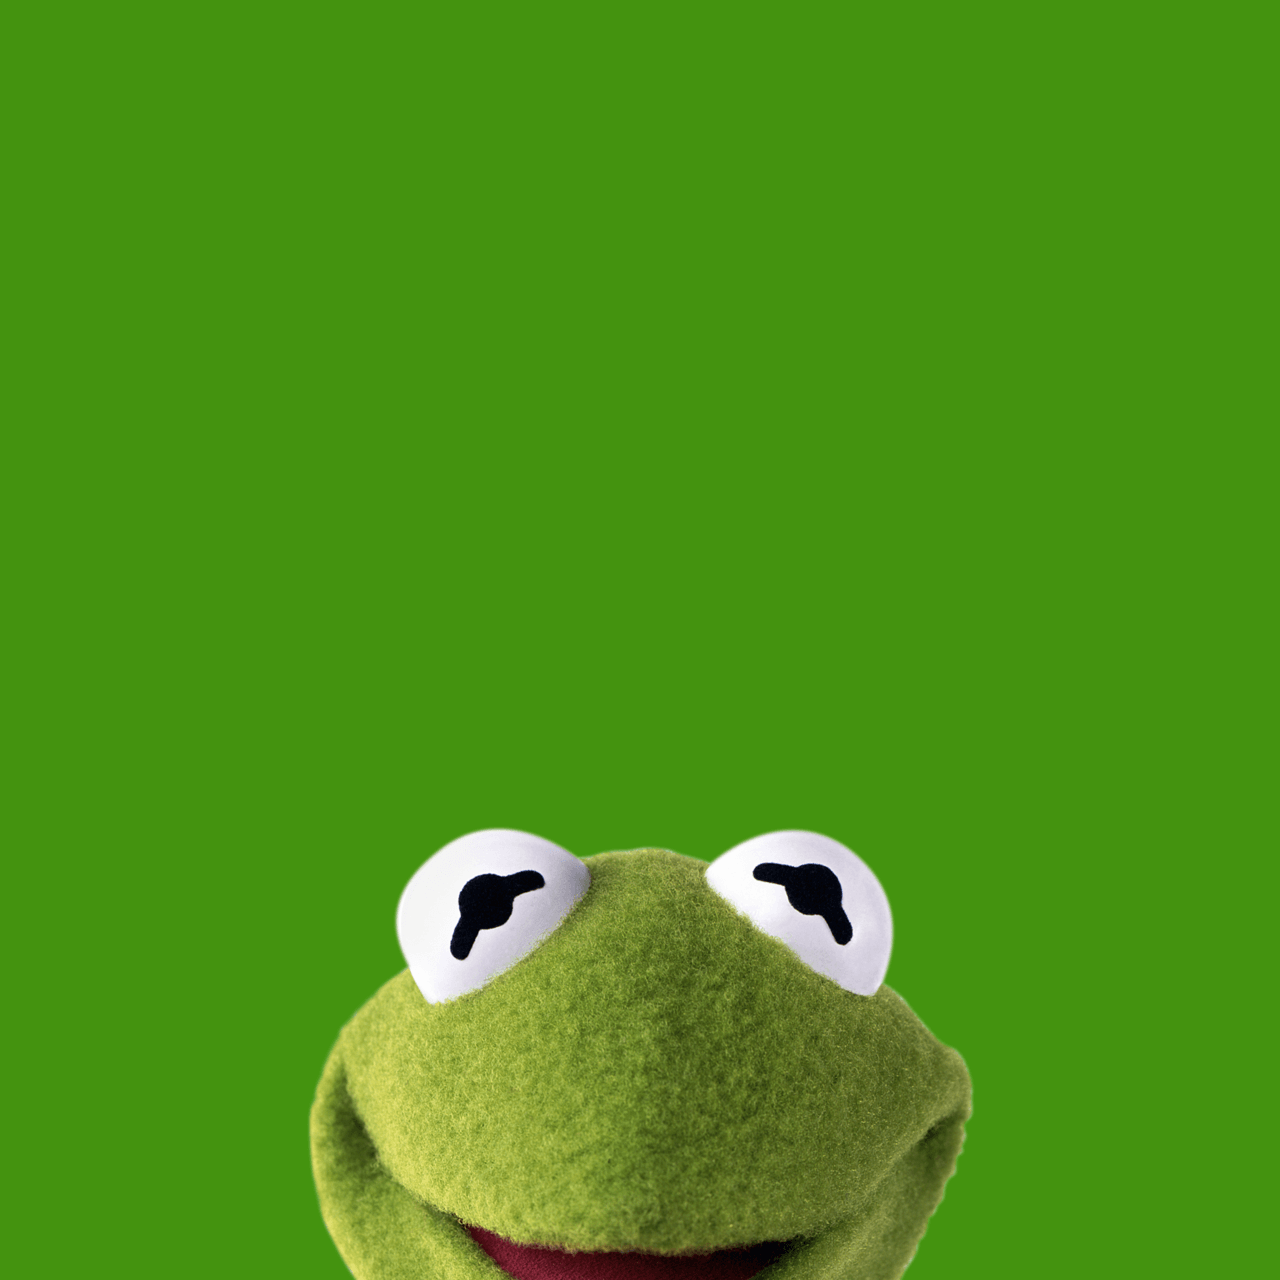 Kermit the Frog iPhone Wallpapers on WallpaperDog.